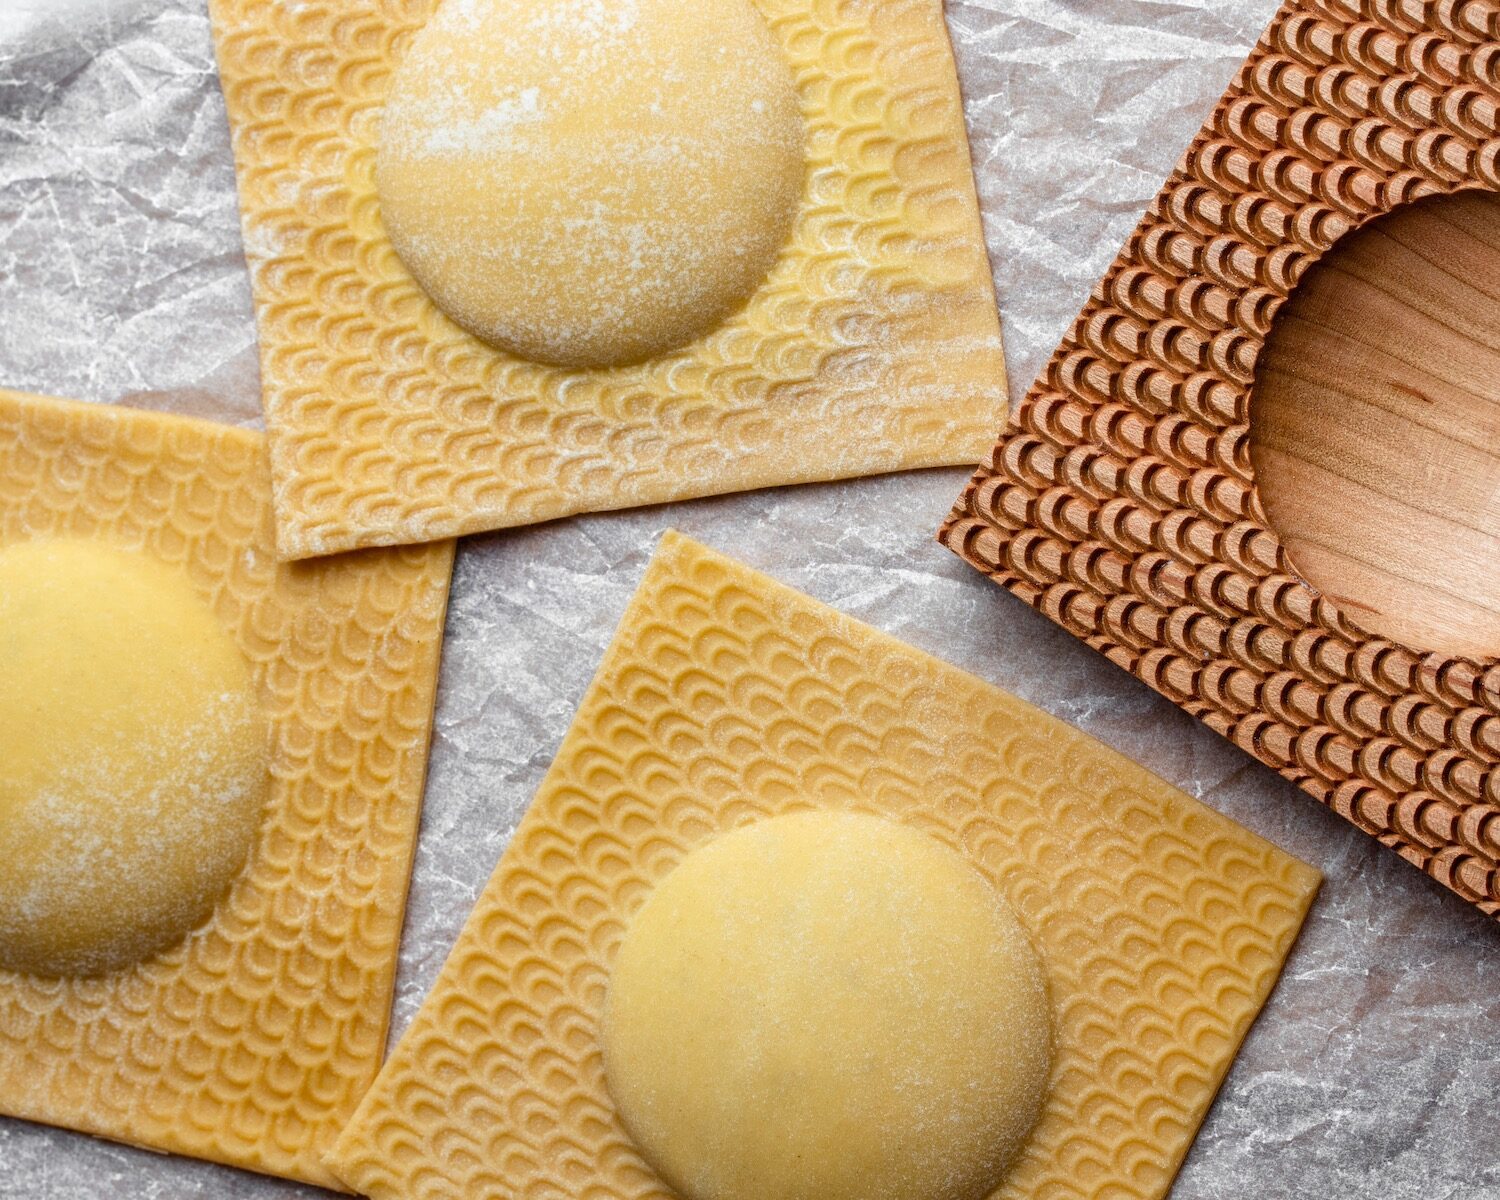 Three big ravioli sit on crumpled parchment paper. We see the edge of a wooden ravioli mold off to the right.